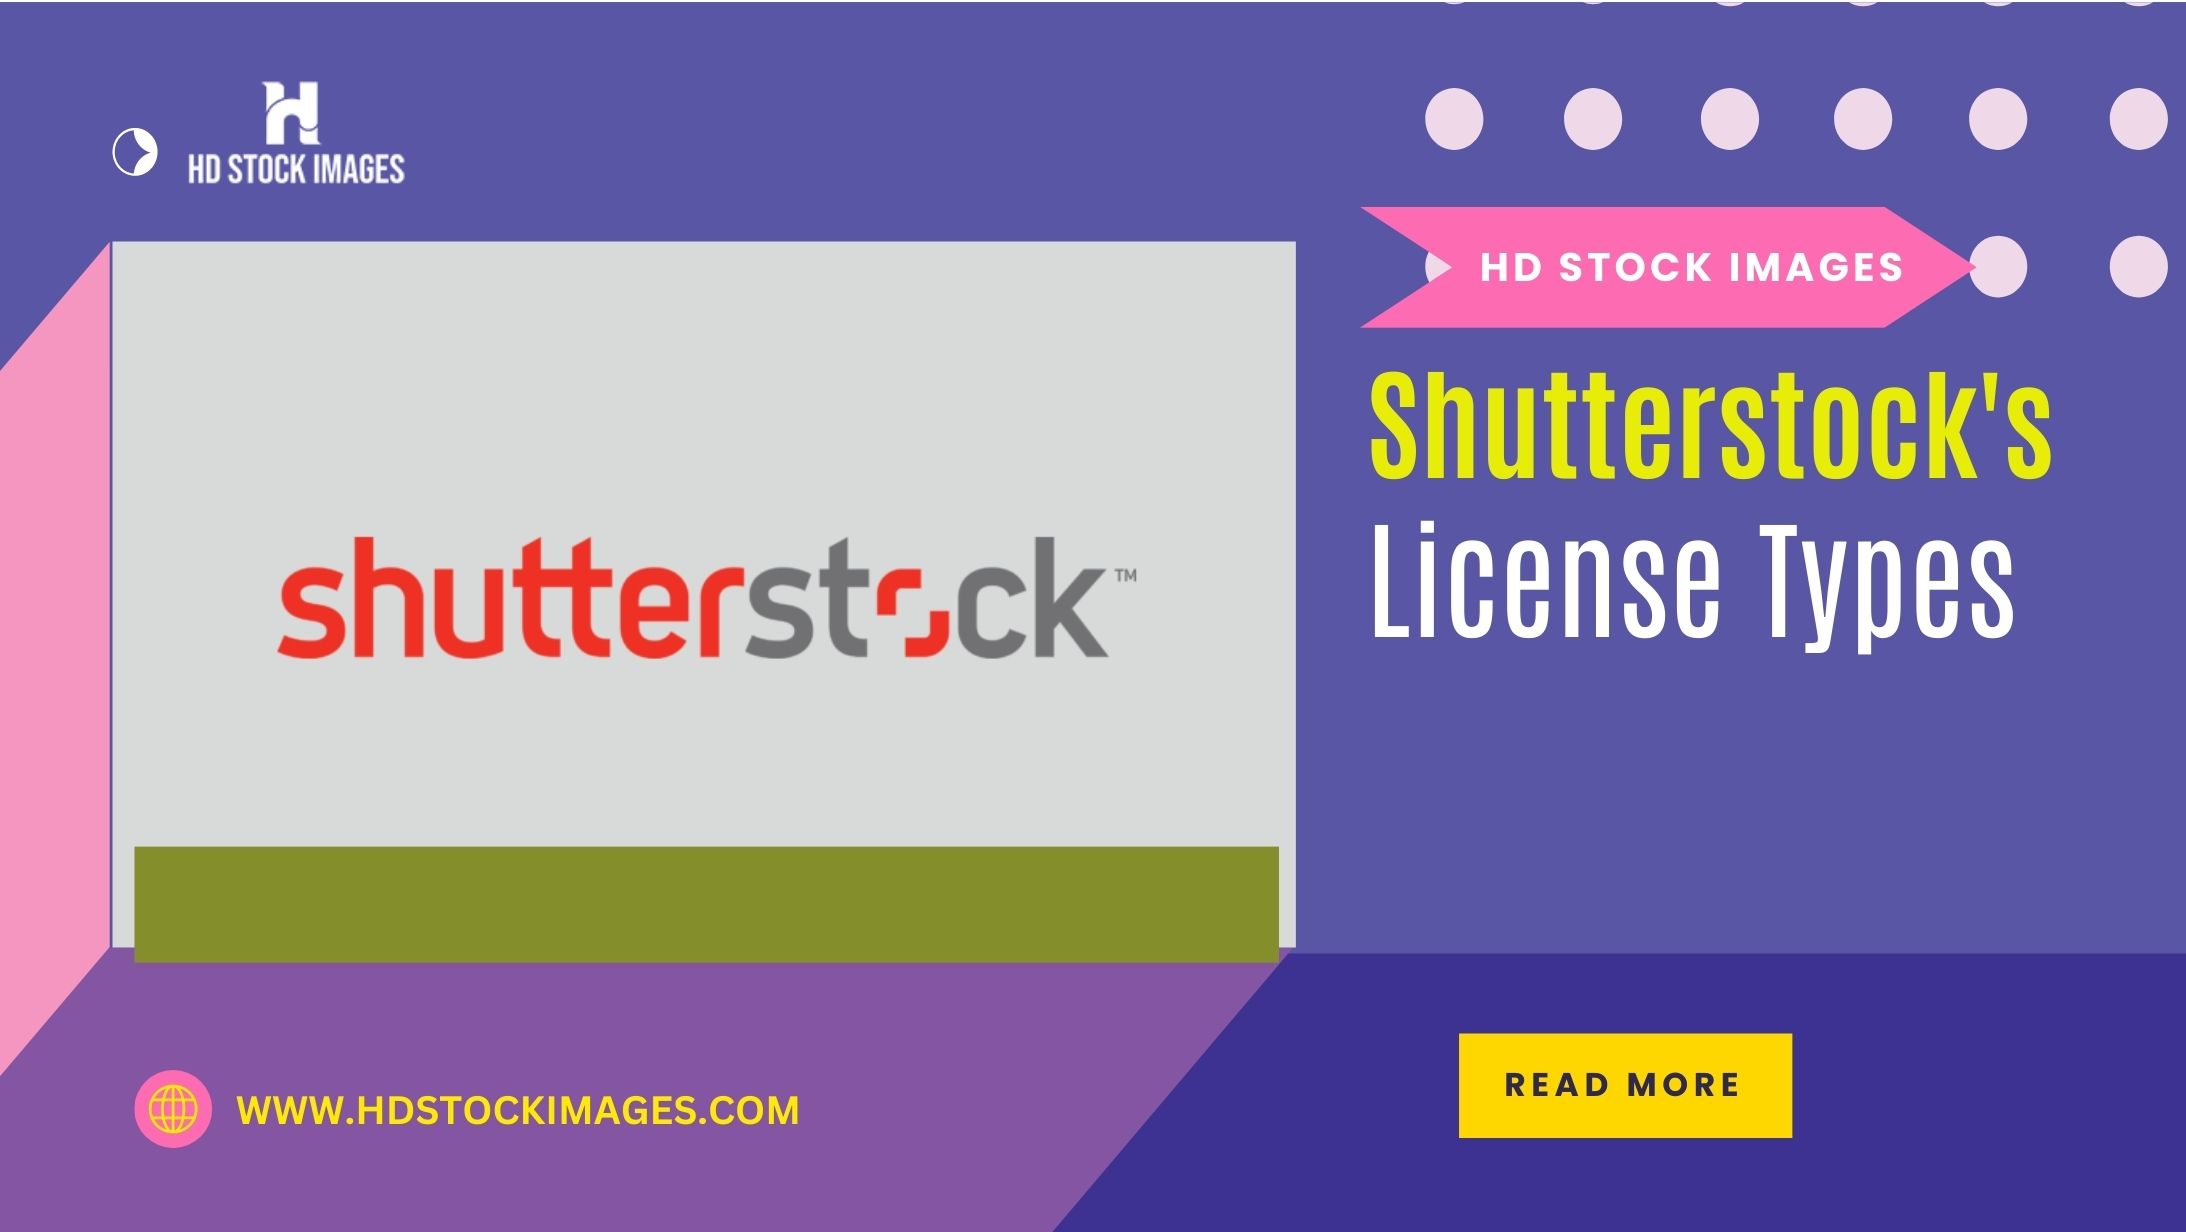 an image of Understanding Shutterstock's License Types: Choosing the Right Usage for Your Needs